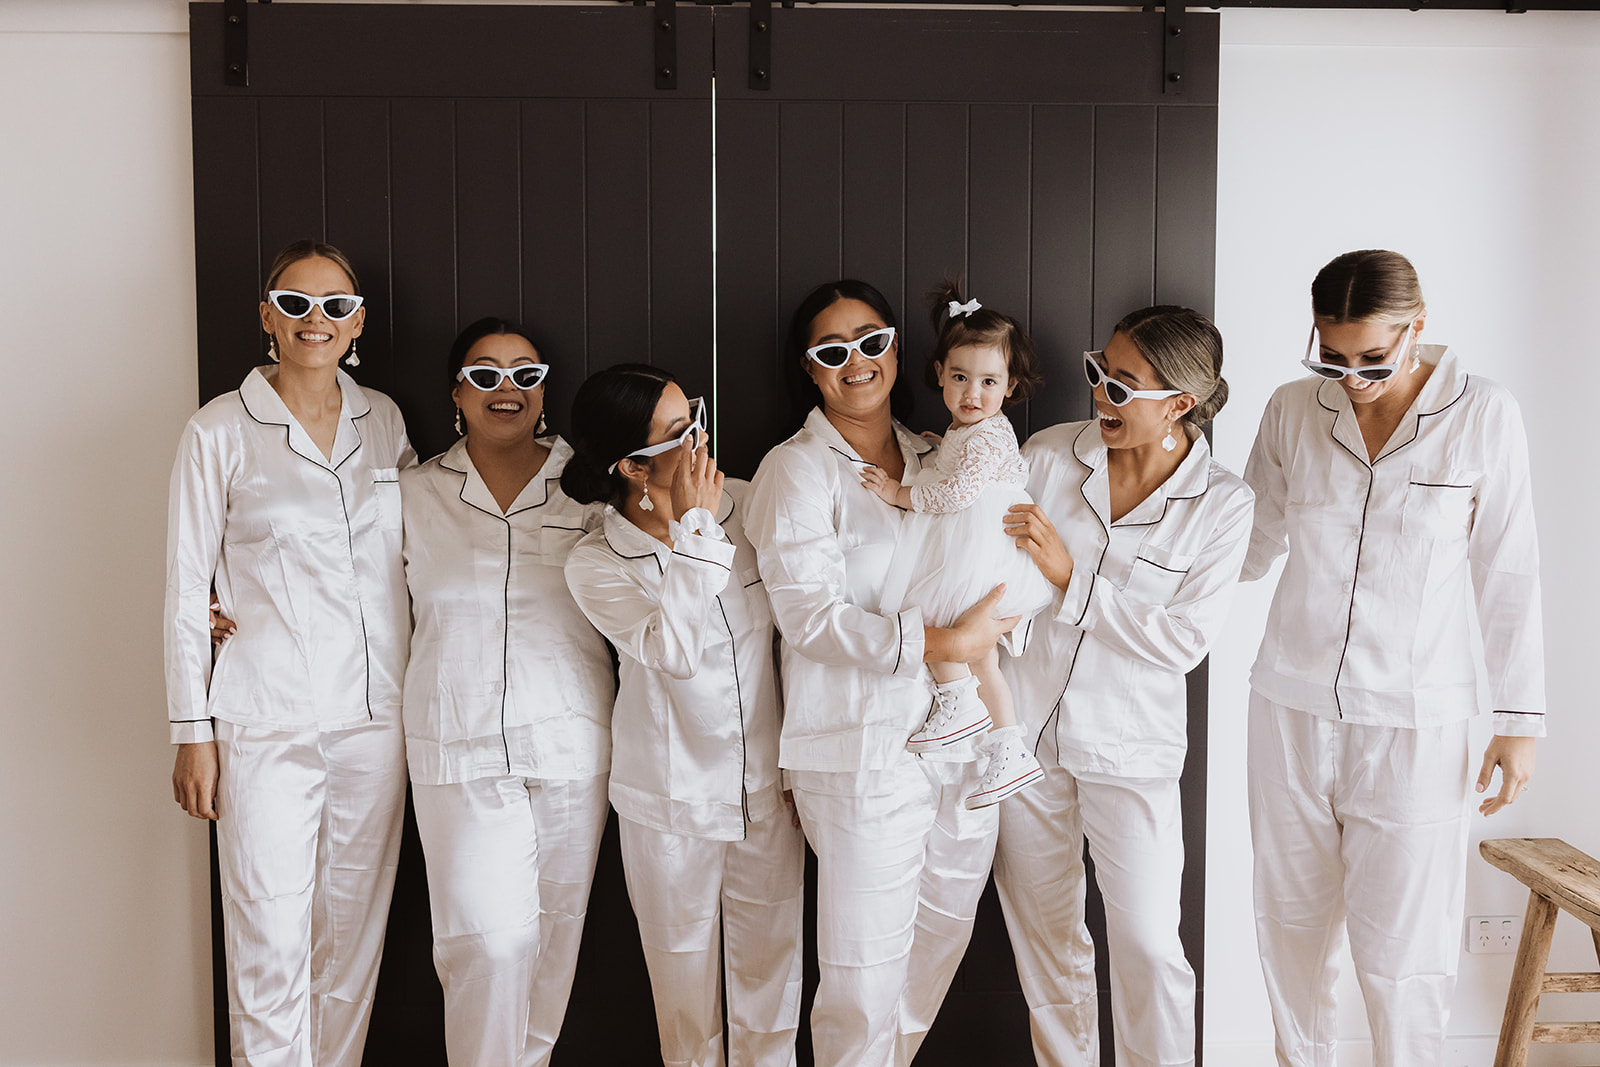 The bride with her bridesmaids wearing sunglasses 